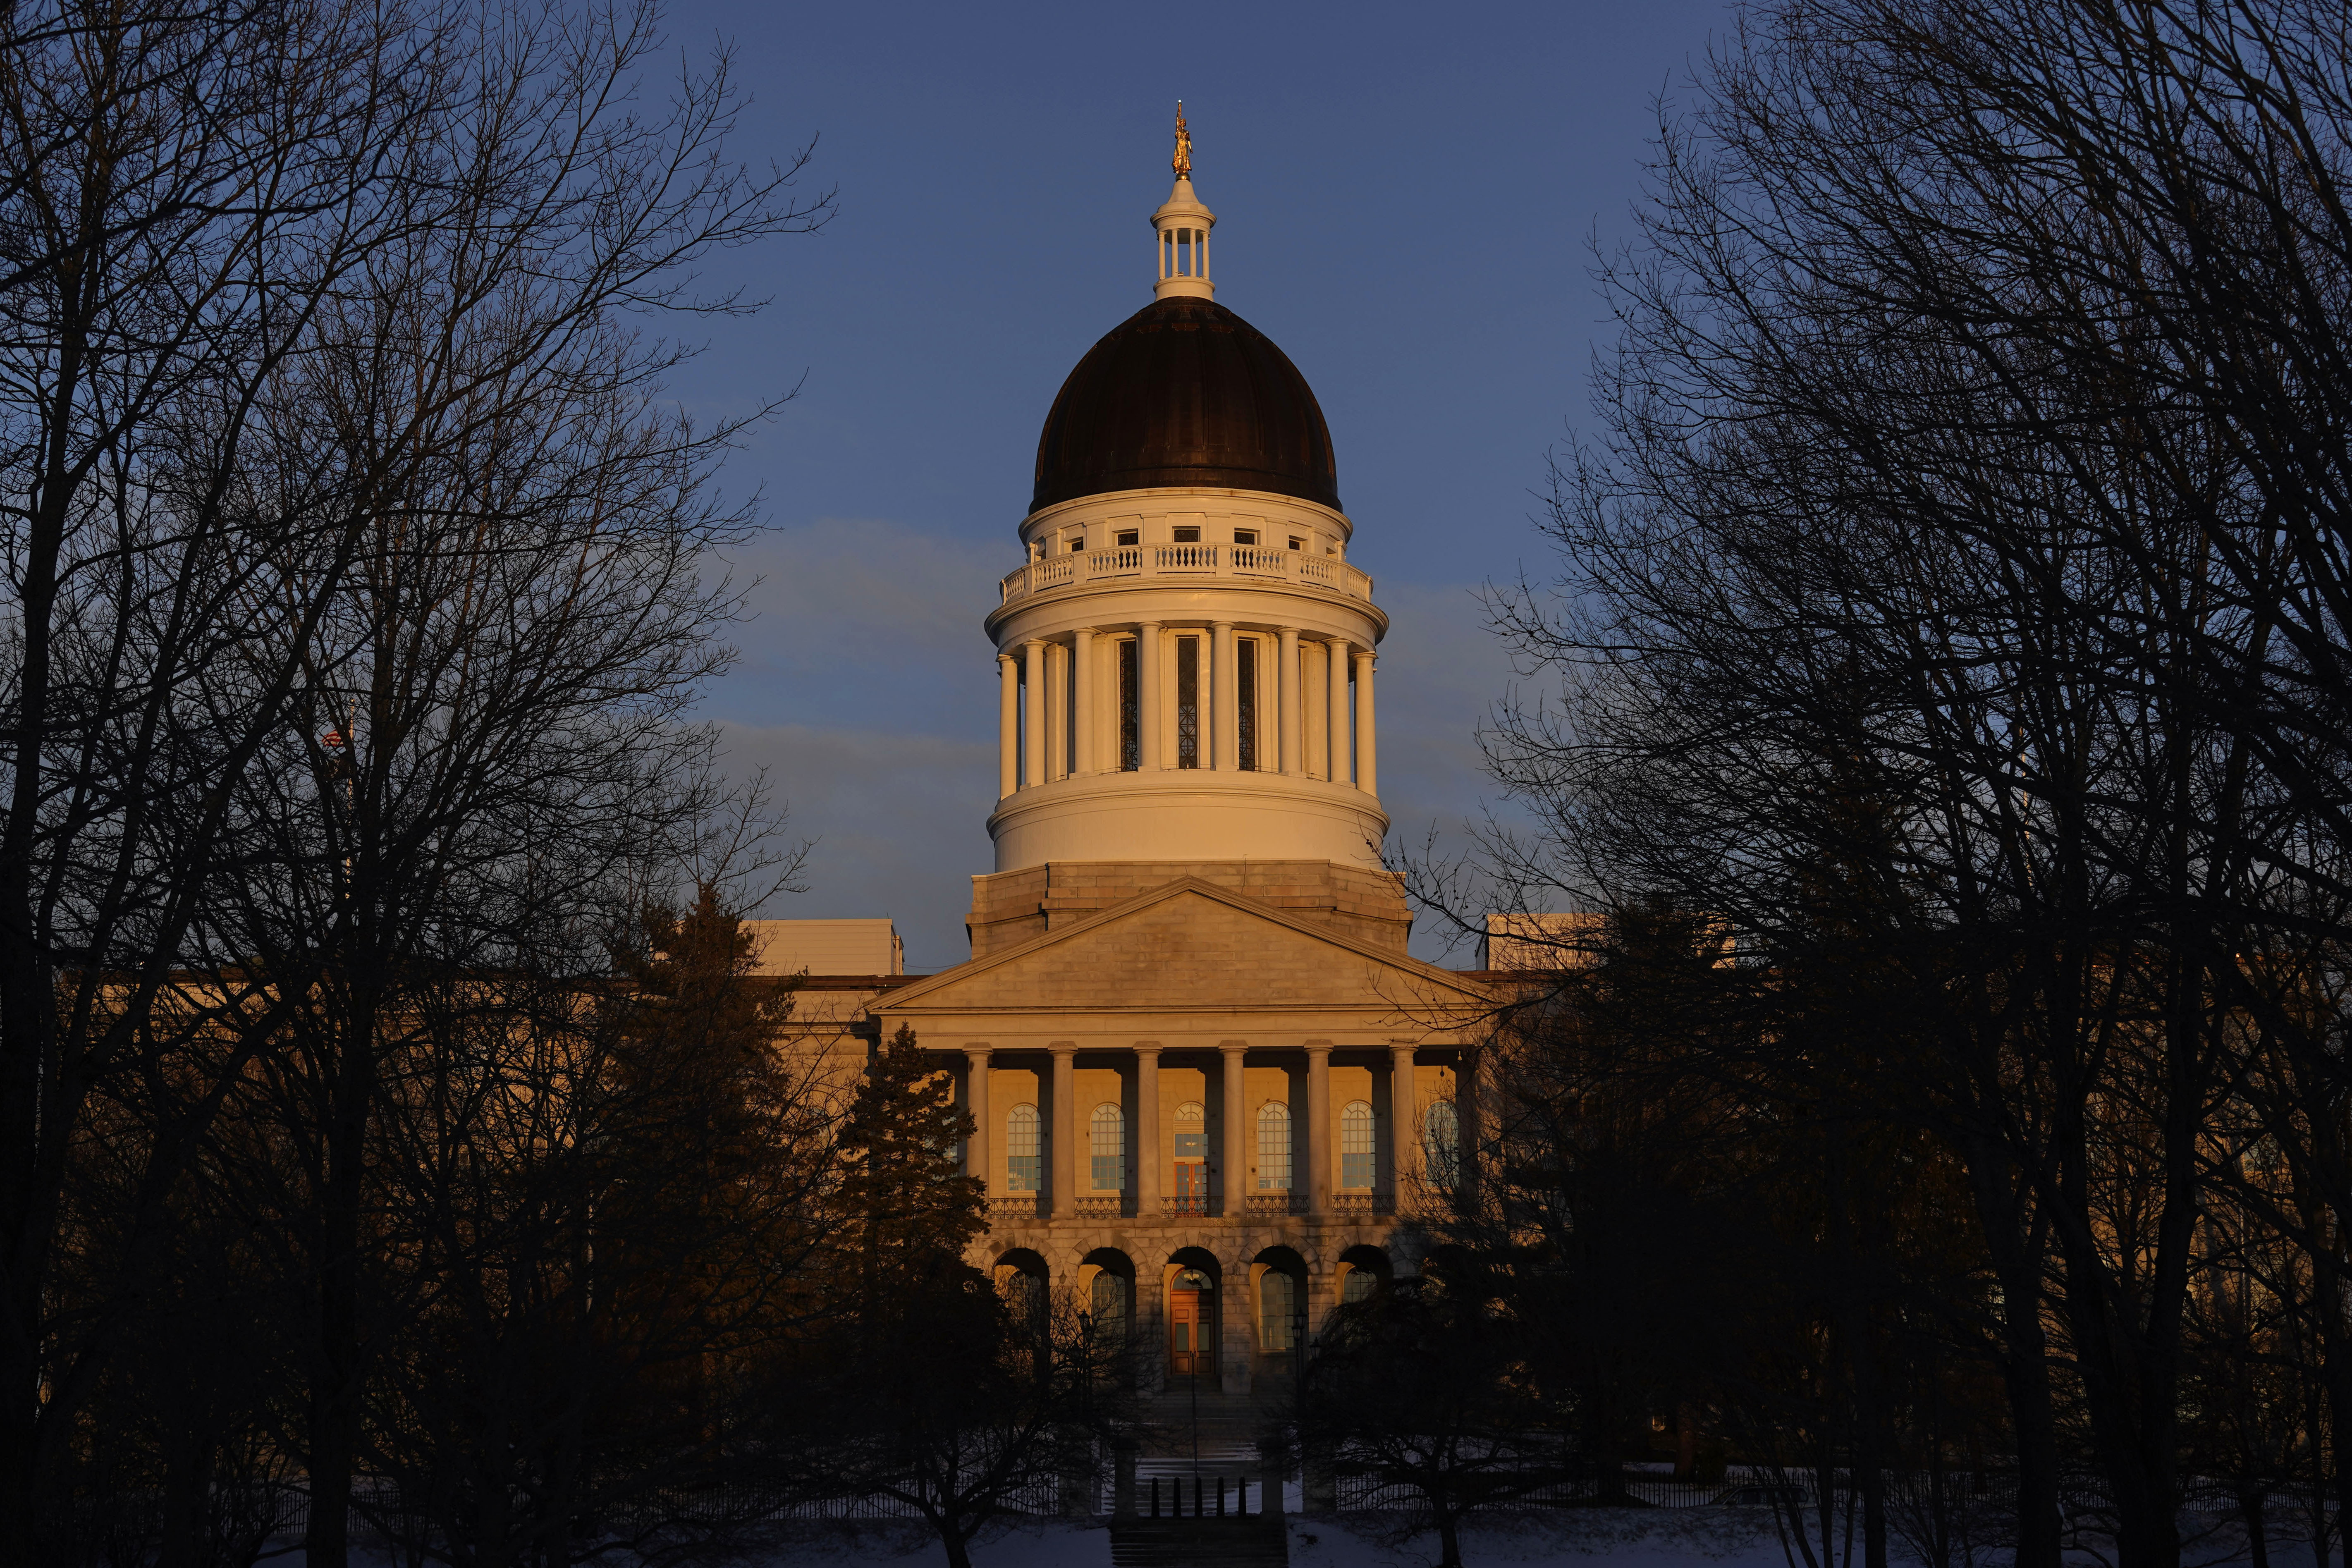 FILE - The Maine State House is seen at sunrise, March 16, 2023, in Augusta, Maine. Teachers and science advocates are voicing skepticism about a Maine proposal to update science education standards to incorporate teaching about genocide, eugenics and the Holocaust because of concerns about adequate teacher training and the nuanced nature of the material. The Maine Department of Education is performing the update as part of a review of standards that is required every five years. The proposed updates would have to ultimately be approved by a committee of the Maine Legislature. (AP Photo/Robert F. Bukaty, File)